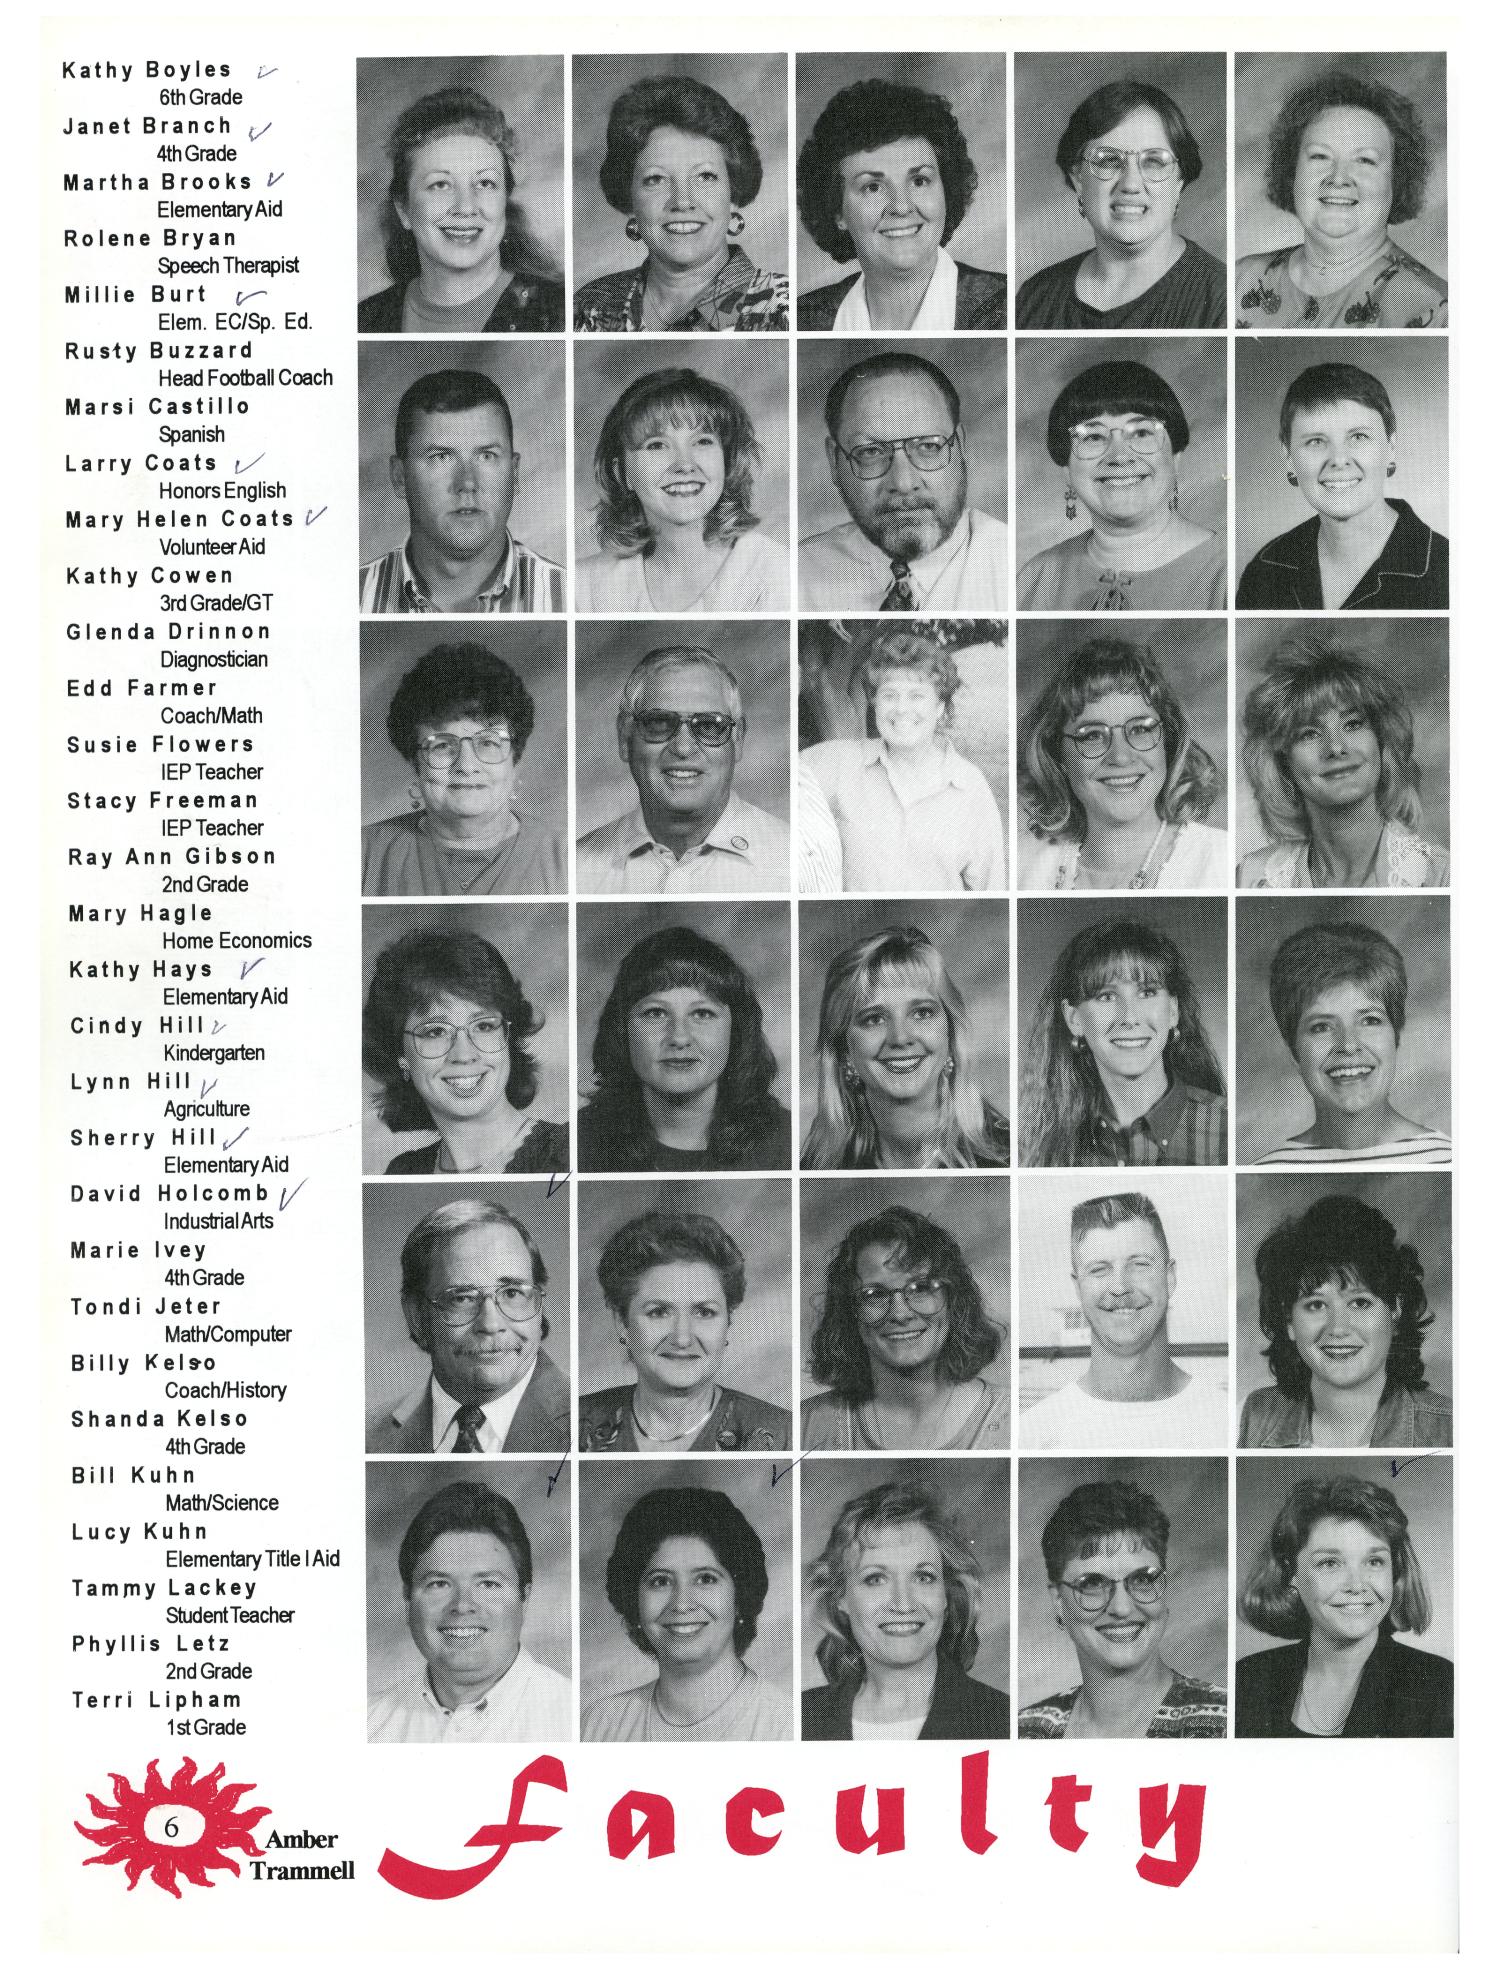 The Hornet, Yearbook of Aspermont Students, 1997
                                                
                                                    6
                                                